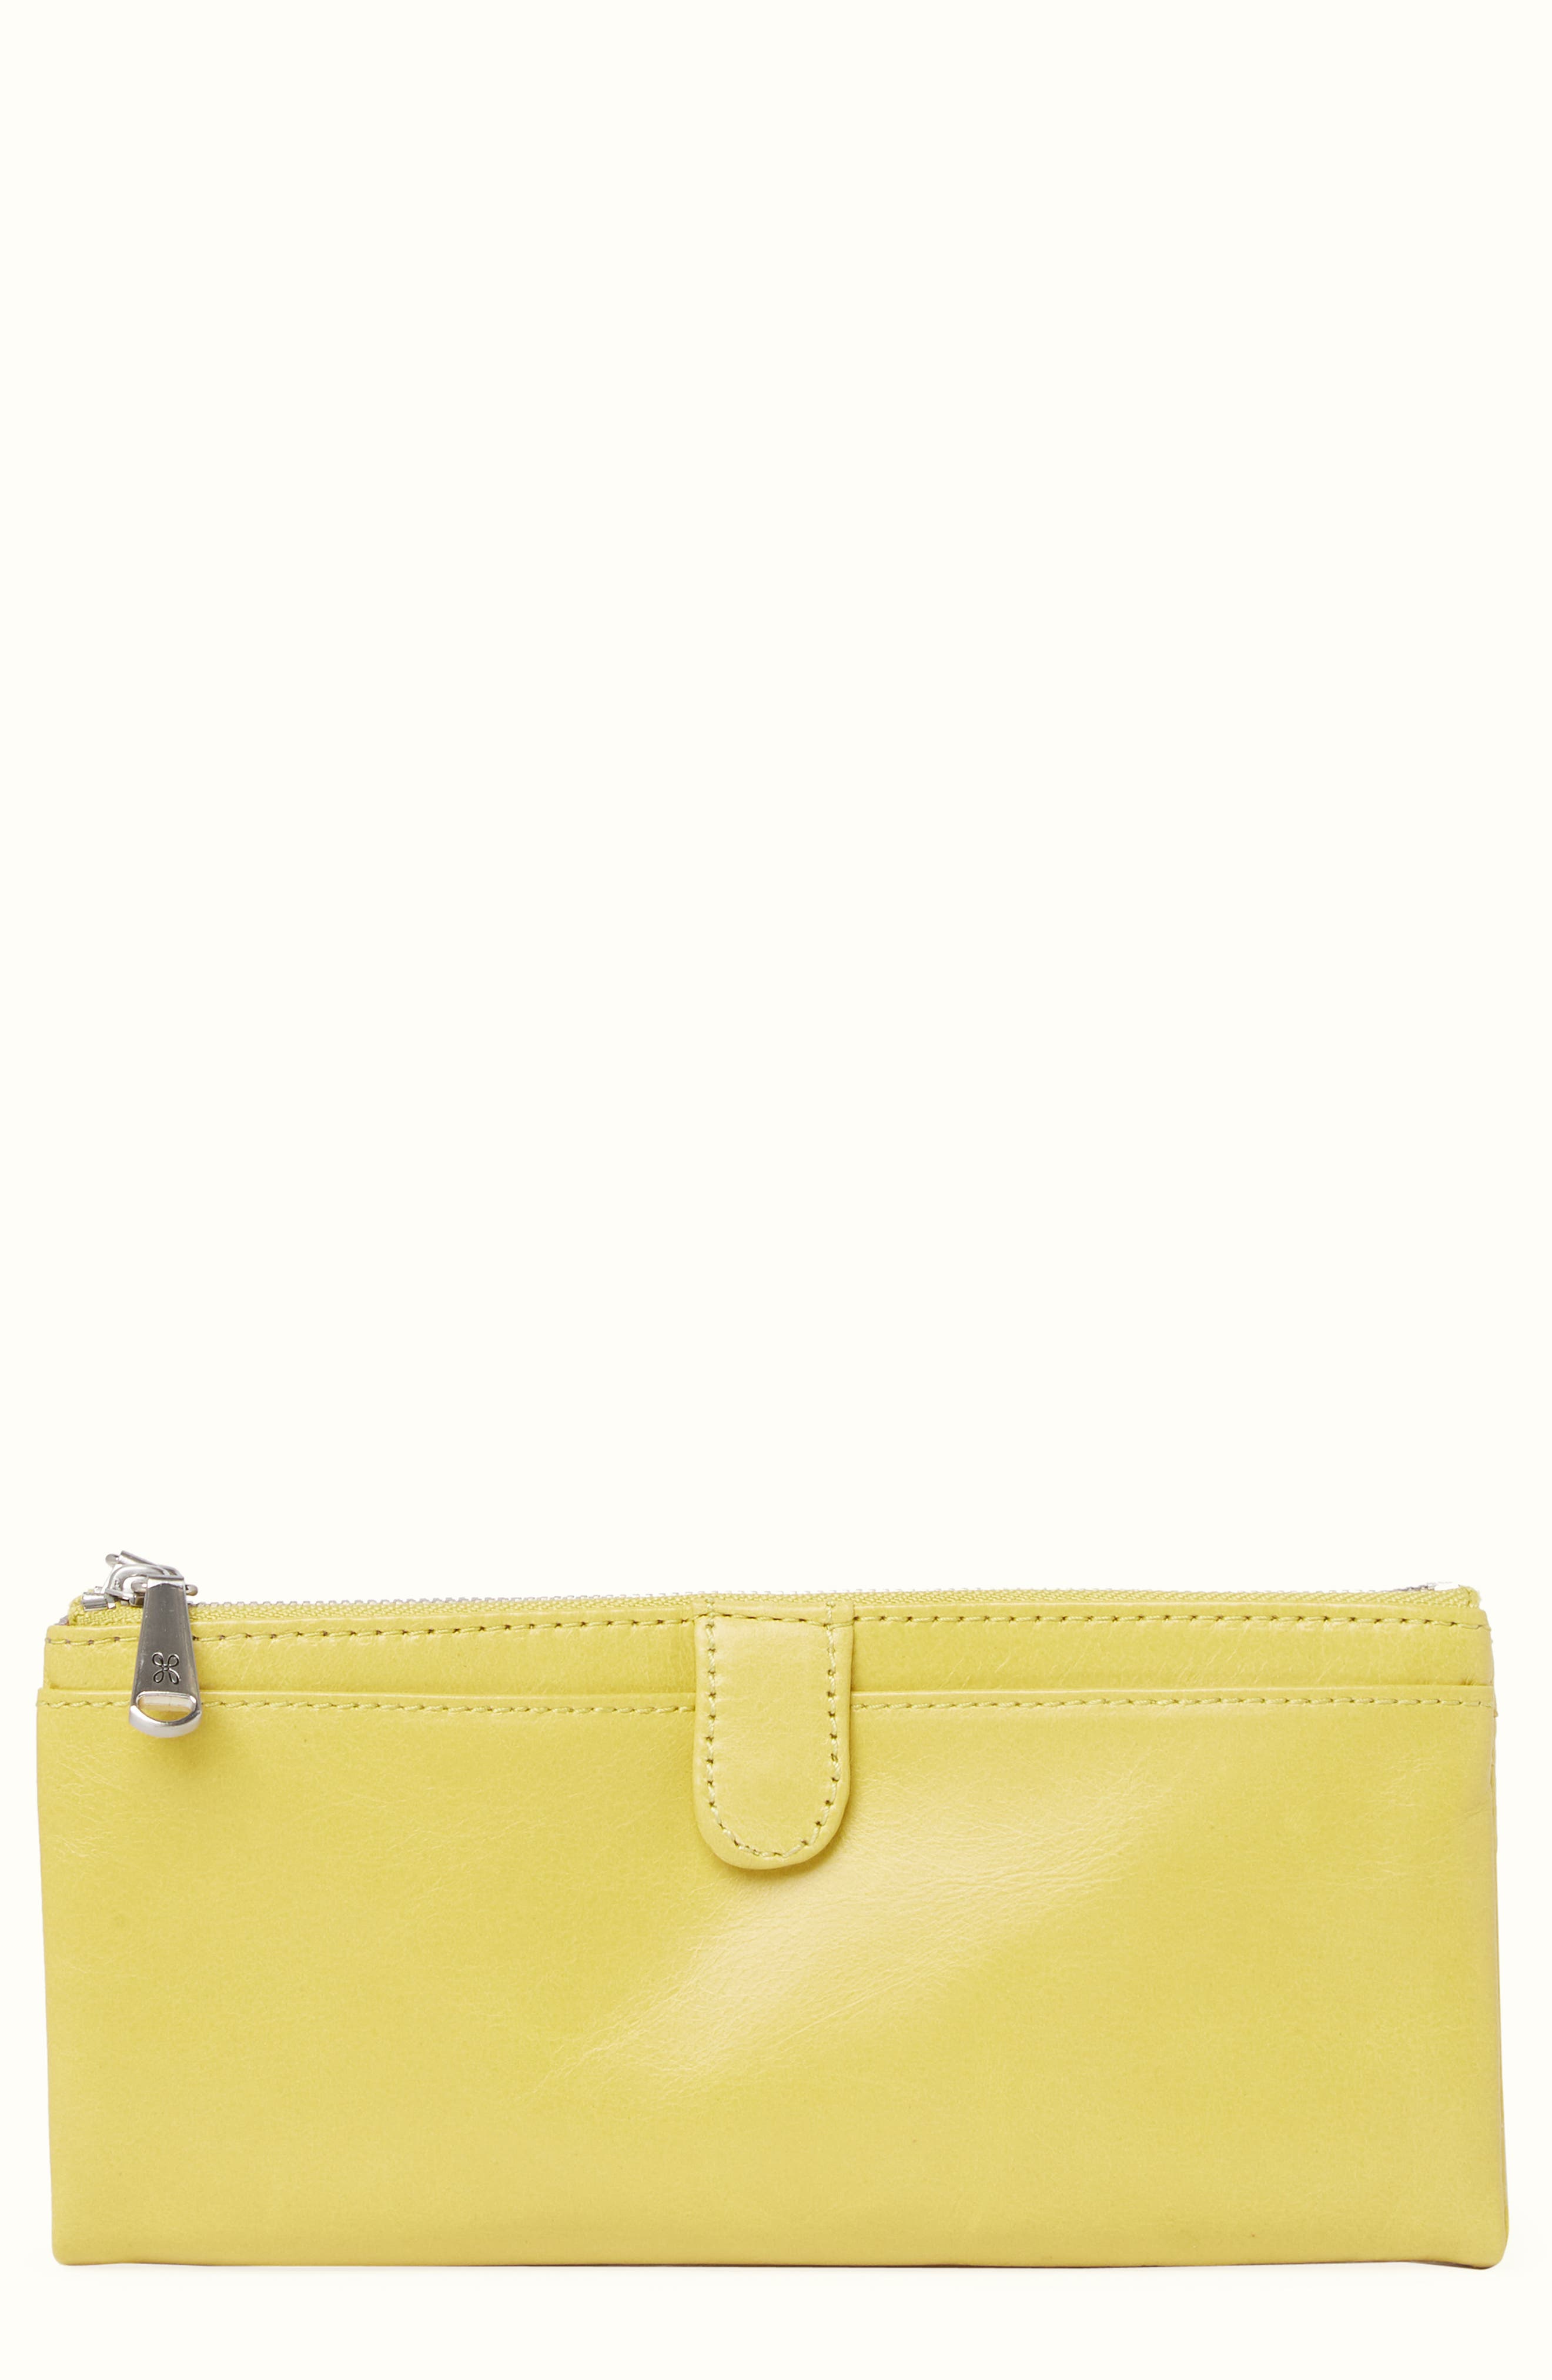 Hobo Taylor Leather Wallet In Light/pastel Yellow4